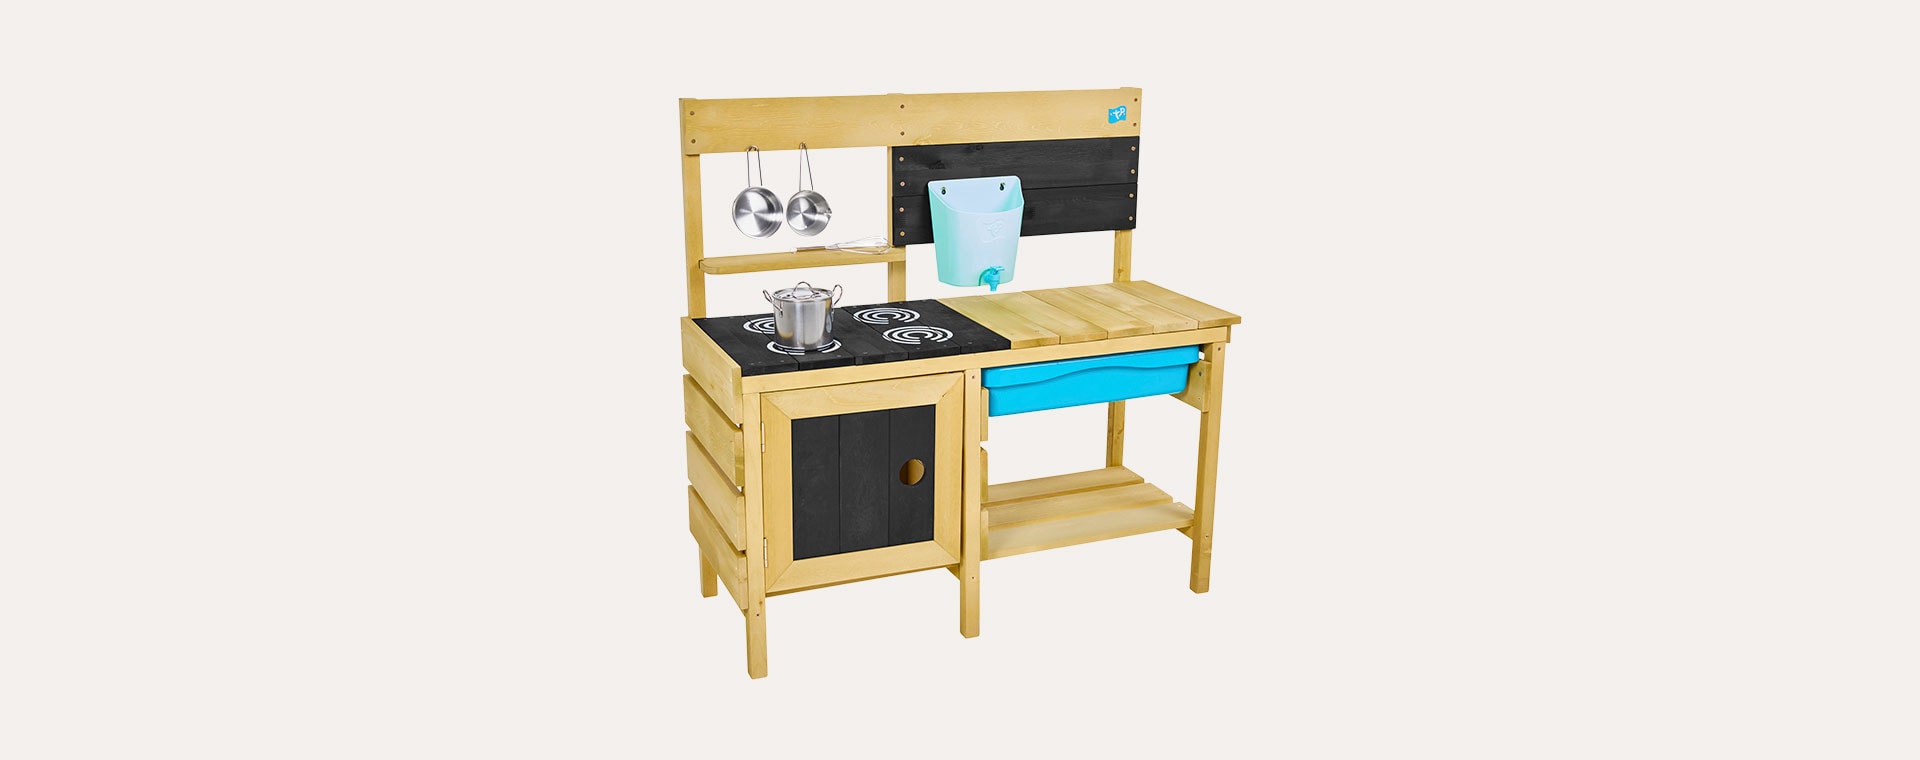 Multi TP Toys Deluxe Mud Kitchen